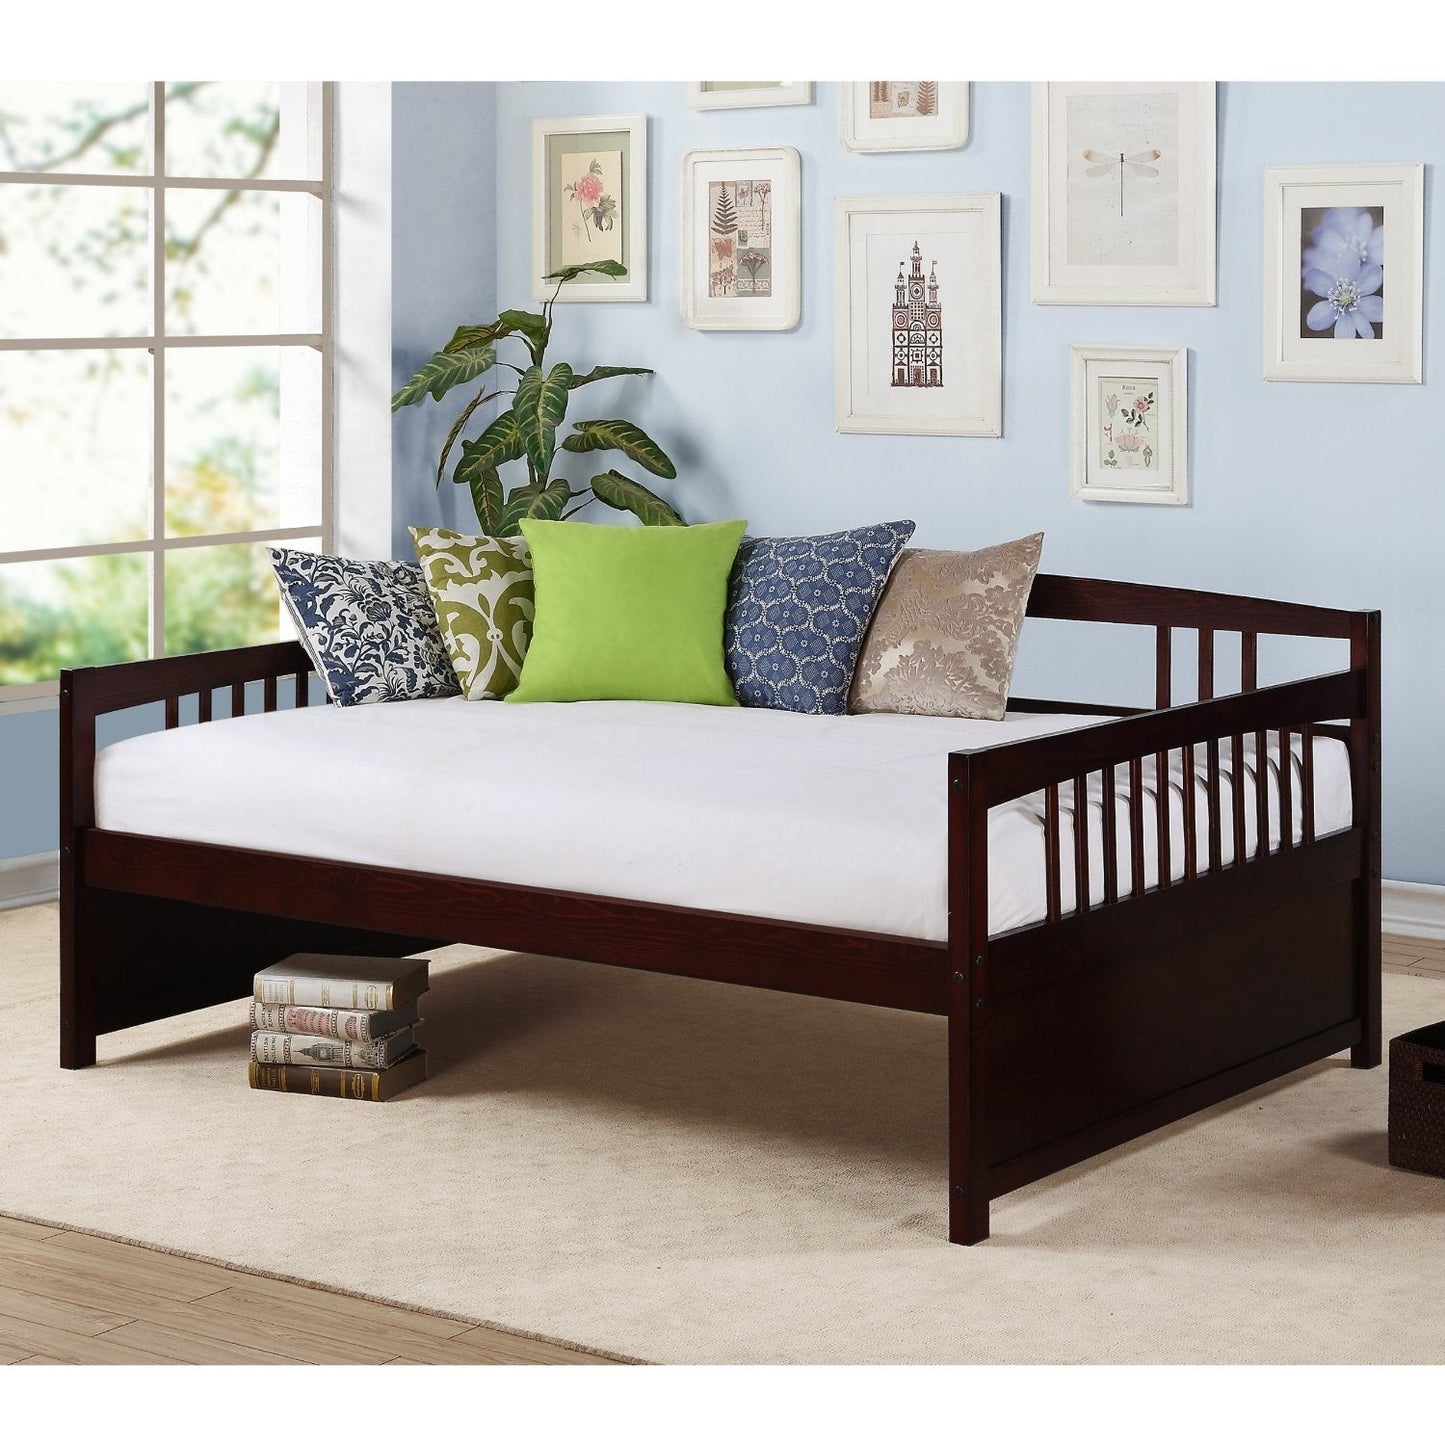 Bedroom > Bed Frames > Daybeds - Full Size Contemporary Daybed In Espresso Wood Finish